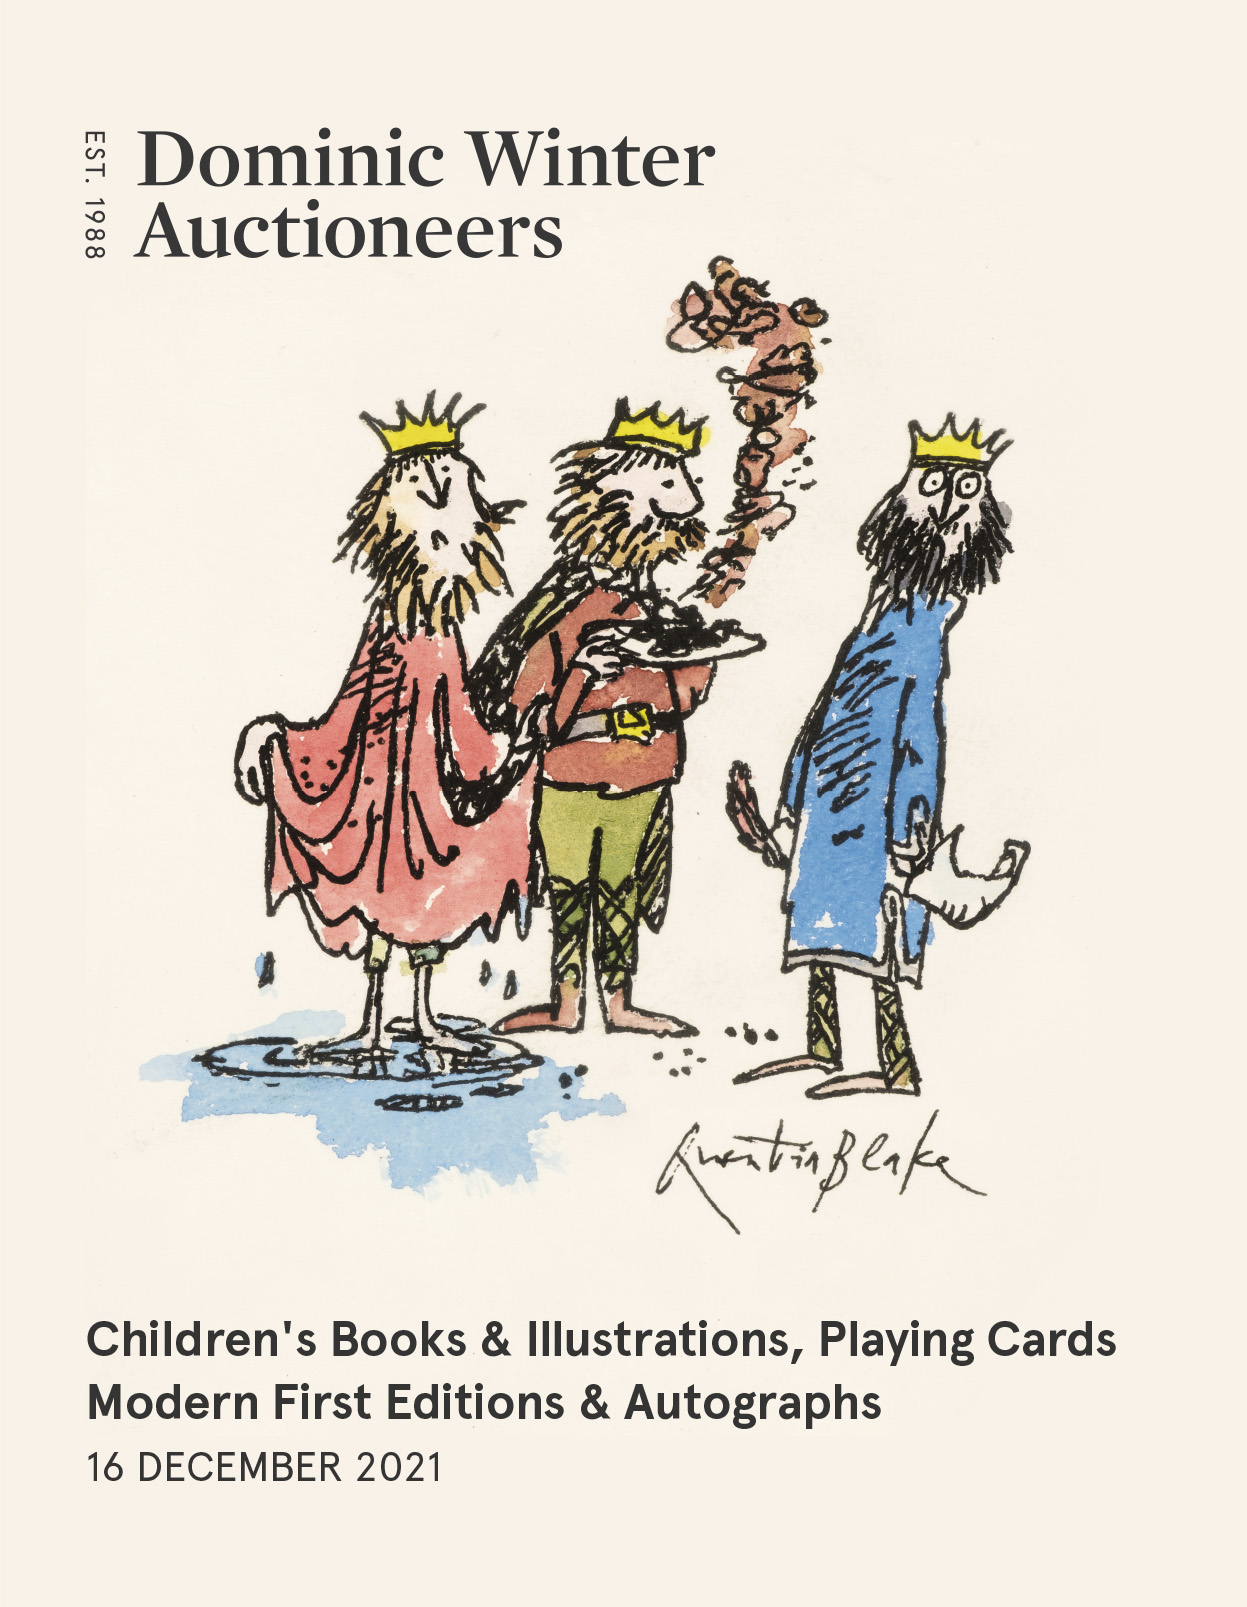 Children's Books & Illustrations, Playing Cards, Modern First Editions & Autographs